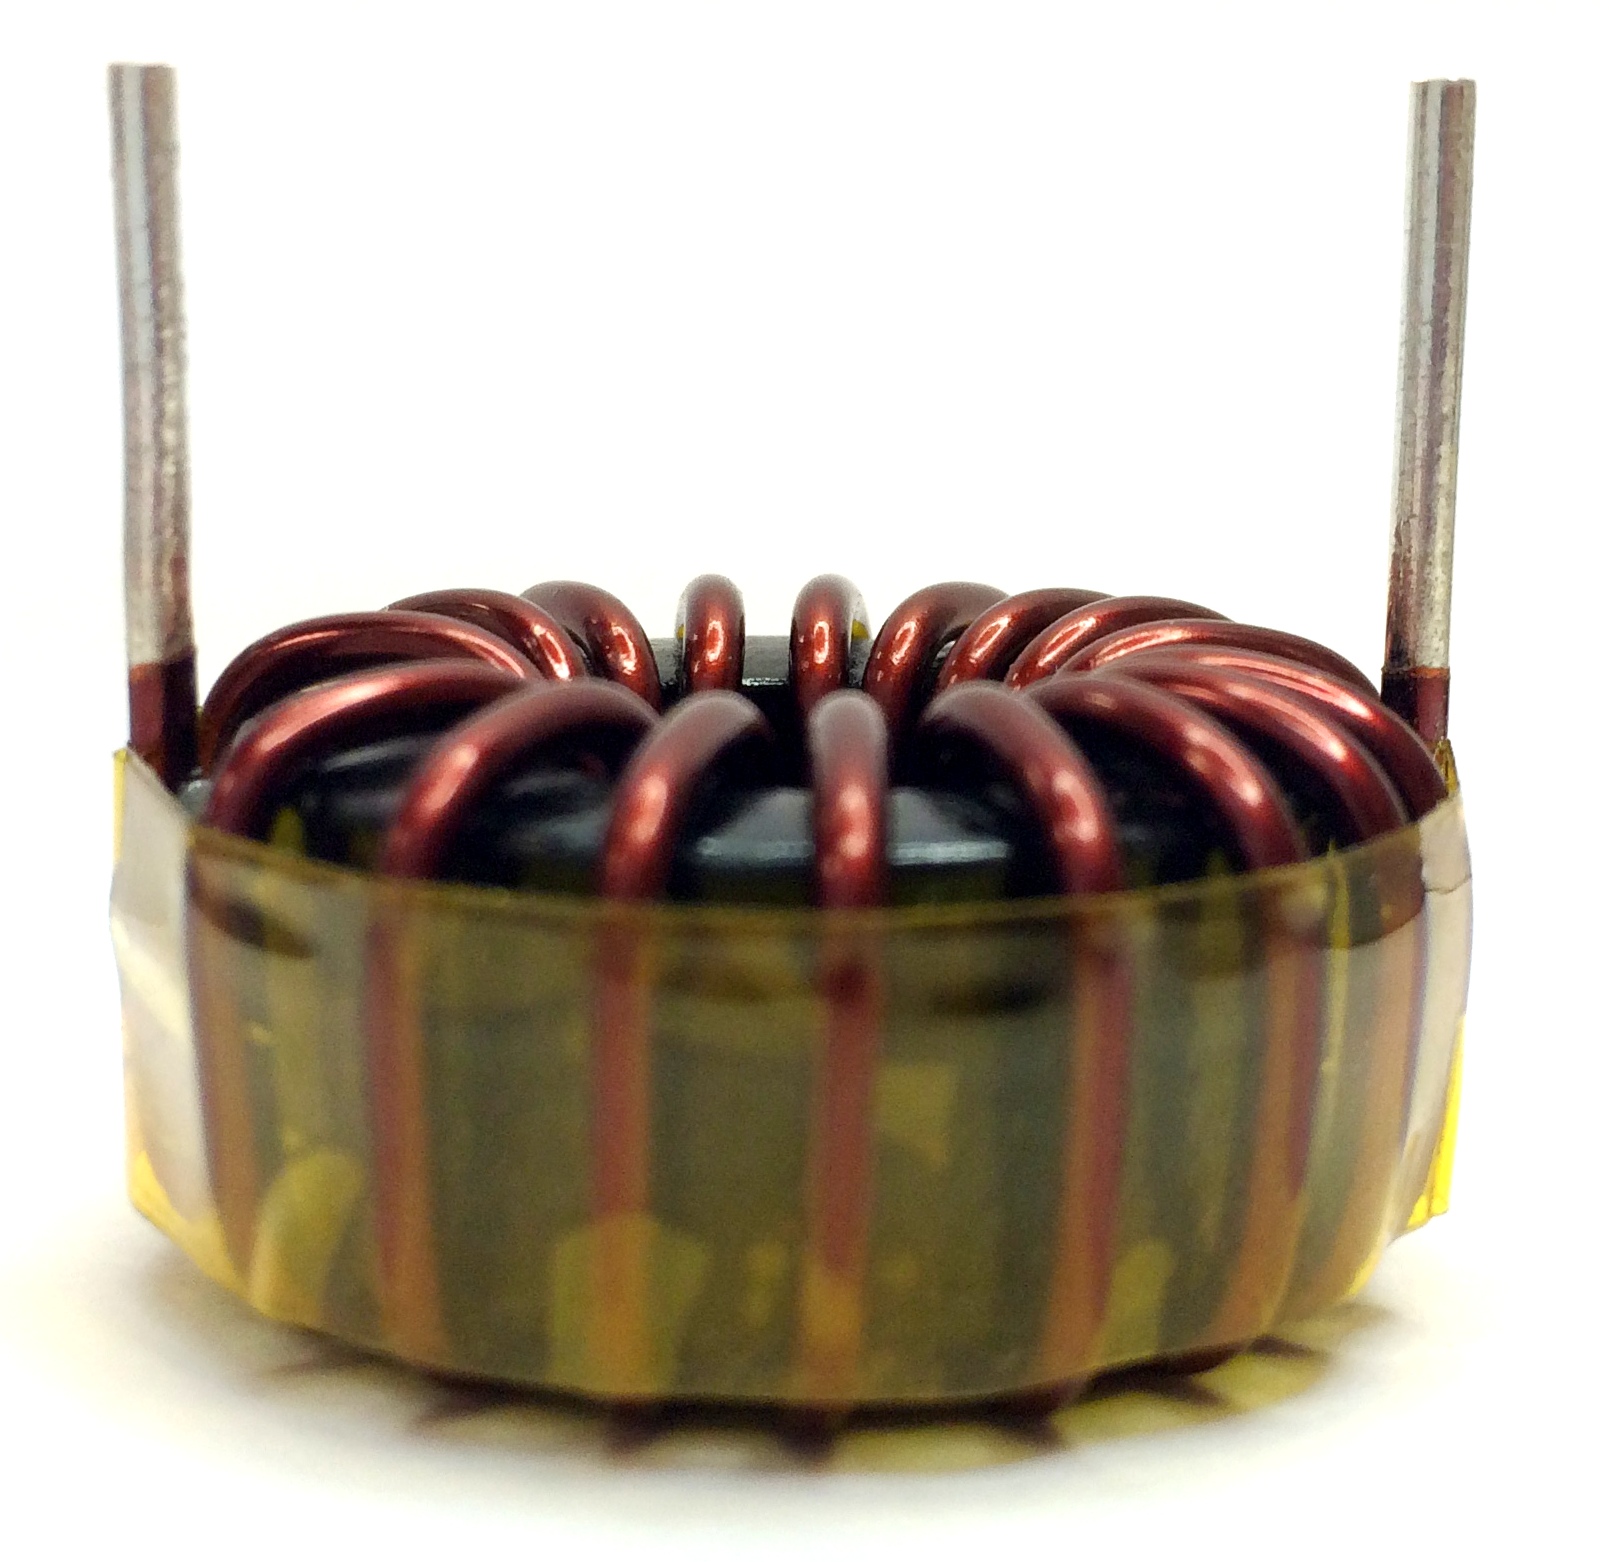 22659 Toroid Inductor